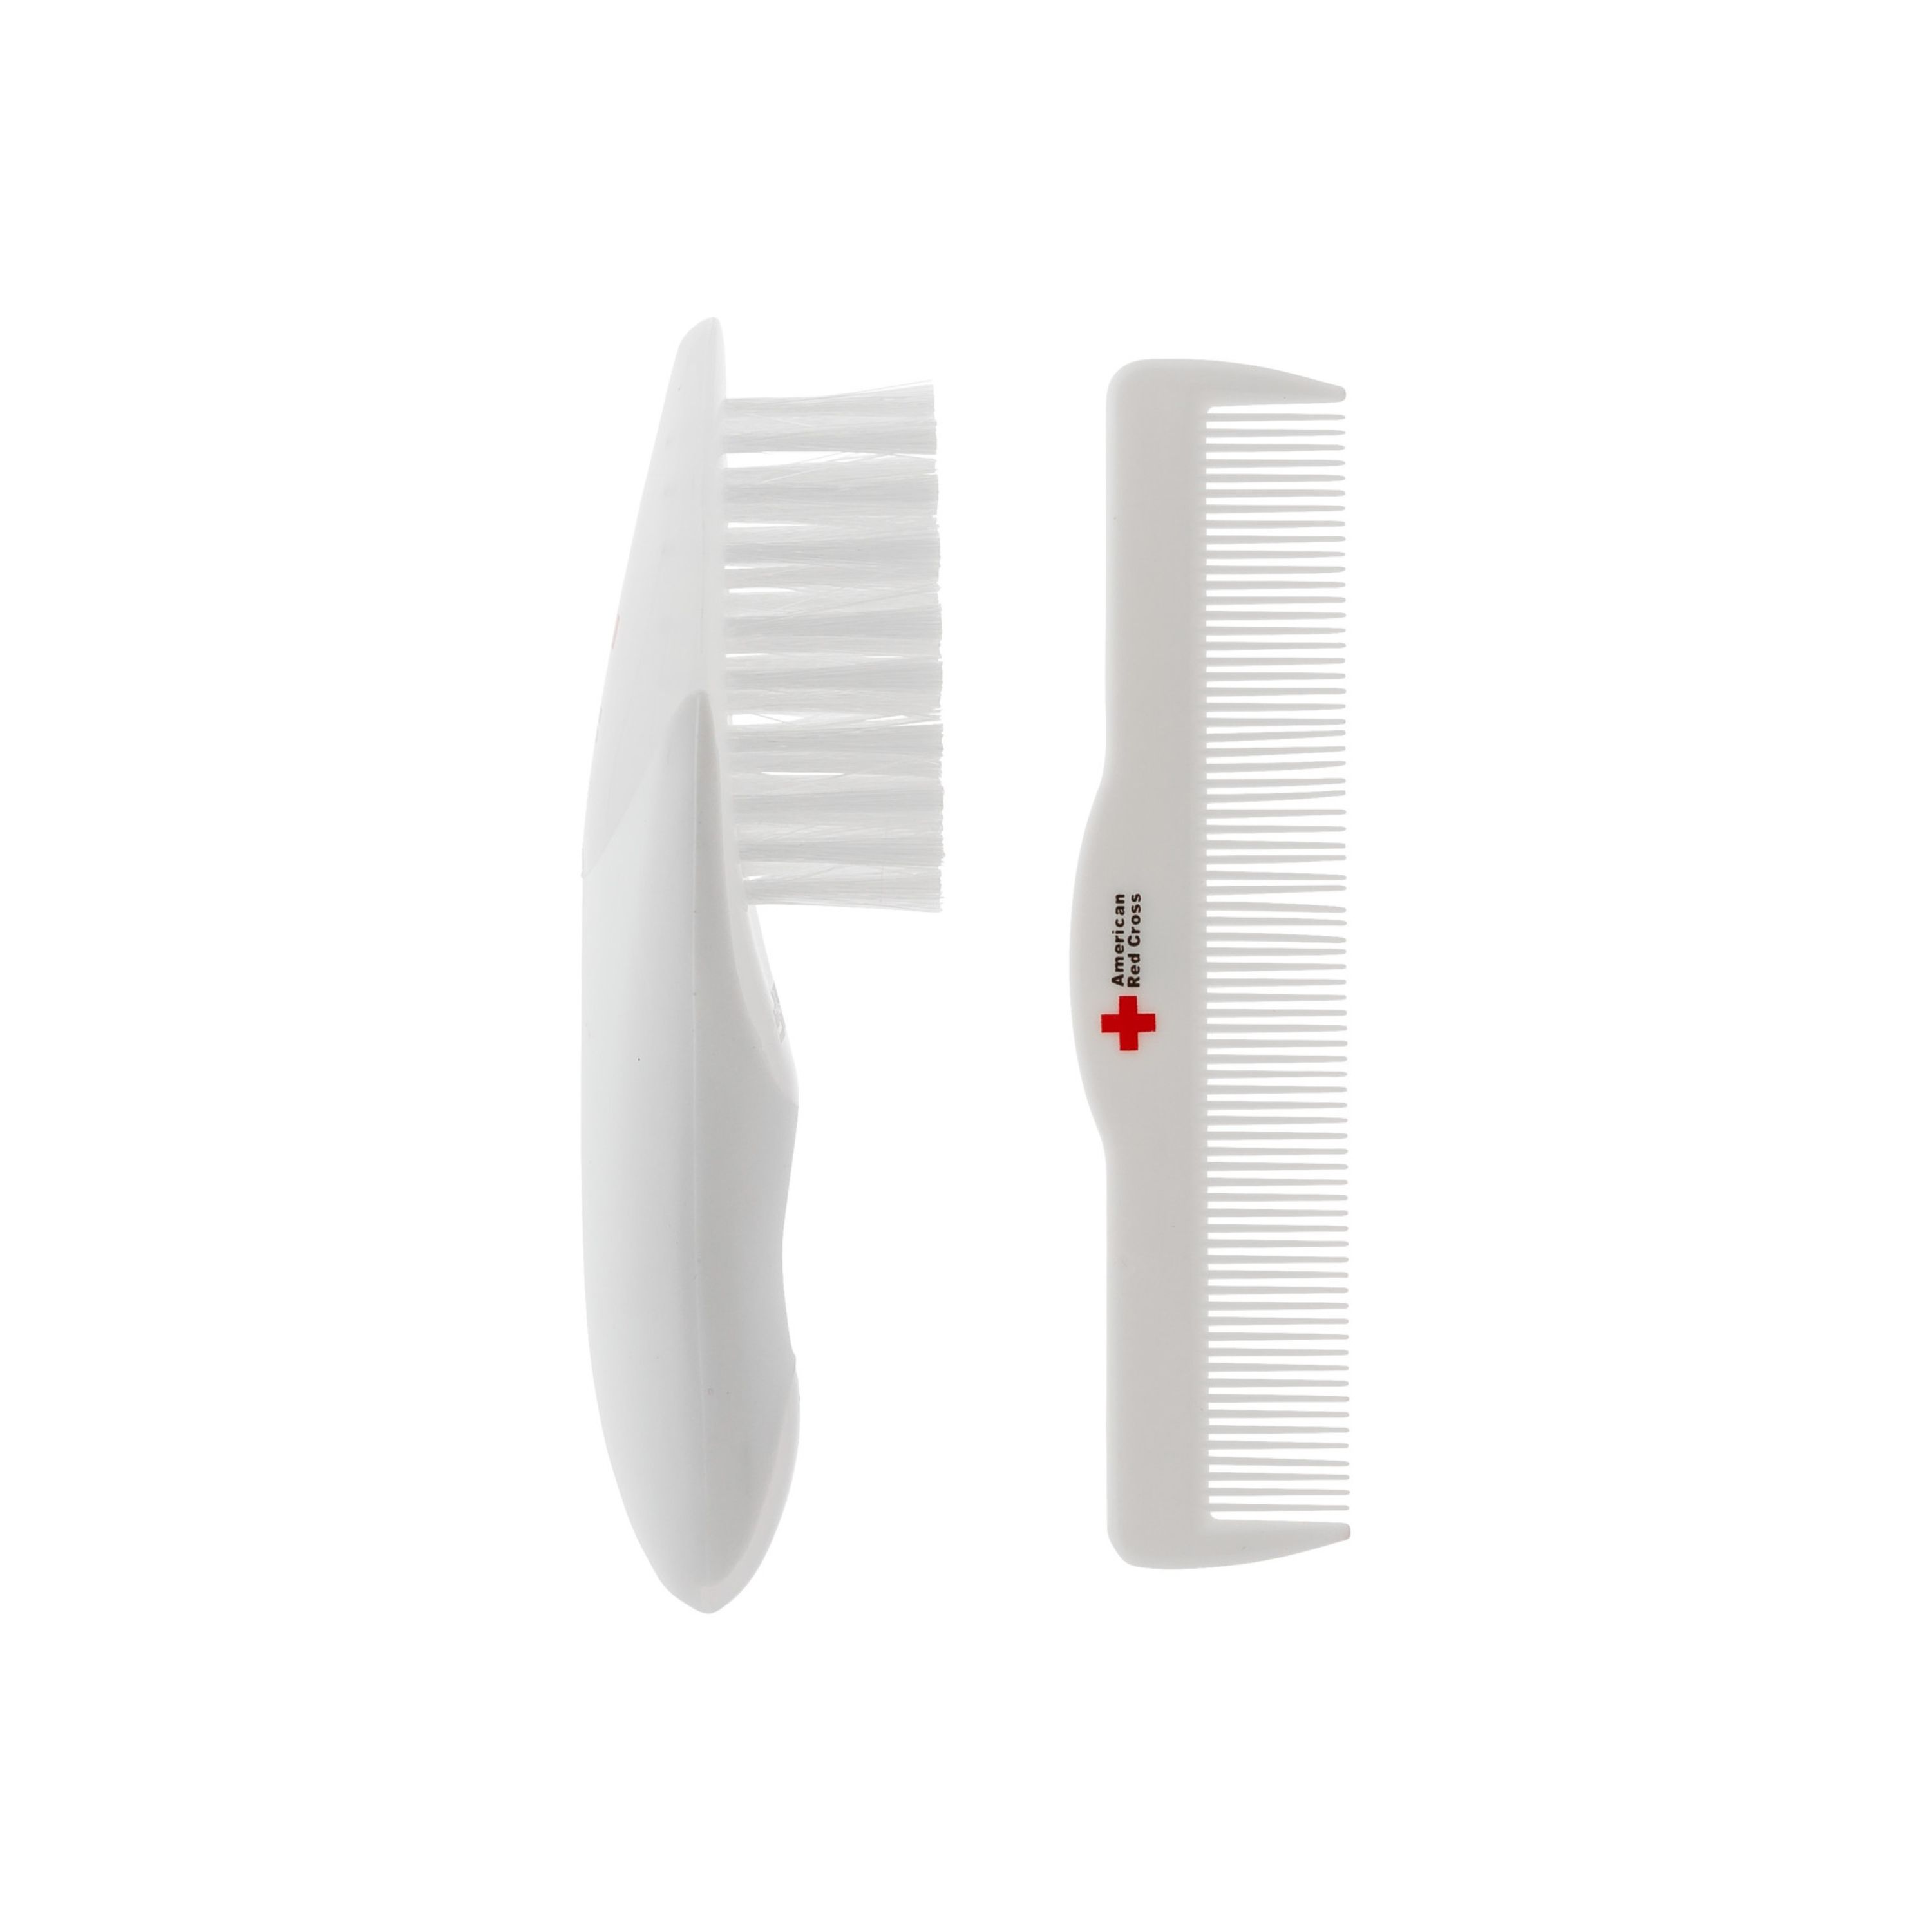 TOMY - American Red Cross Deluxe Health and Grooming Kit - image 3 of 5